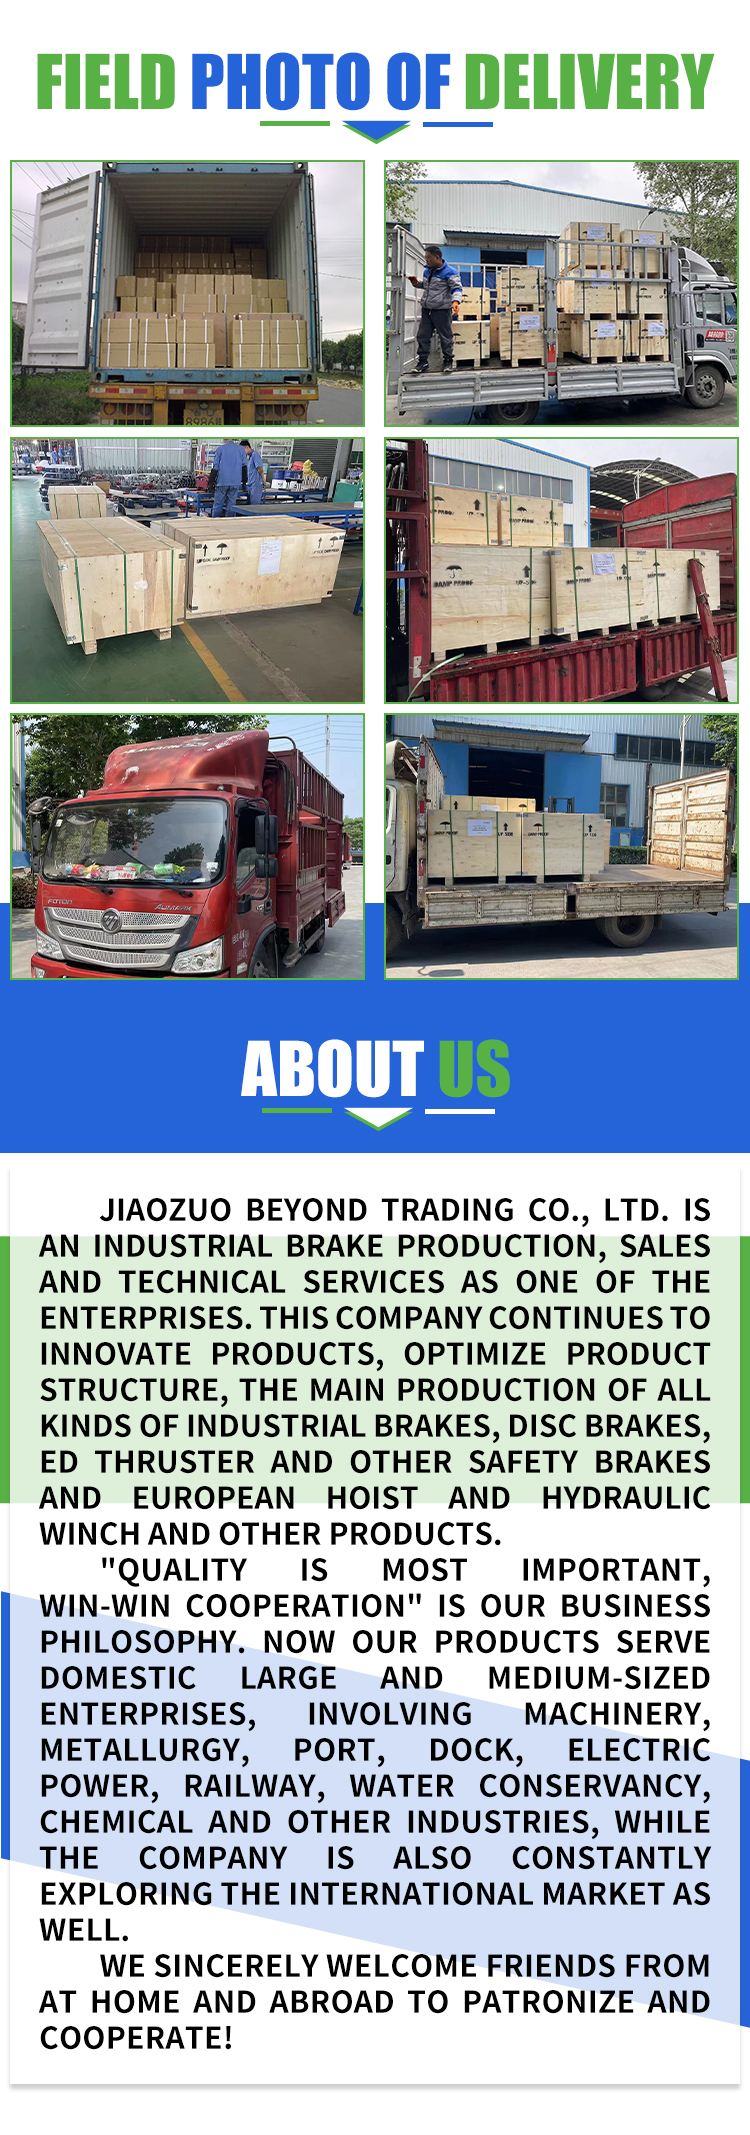 Supply industrial grade drum brakes for cranes with longer service life made of cast steel materials